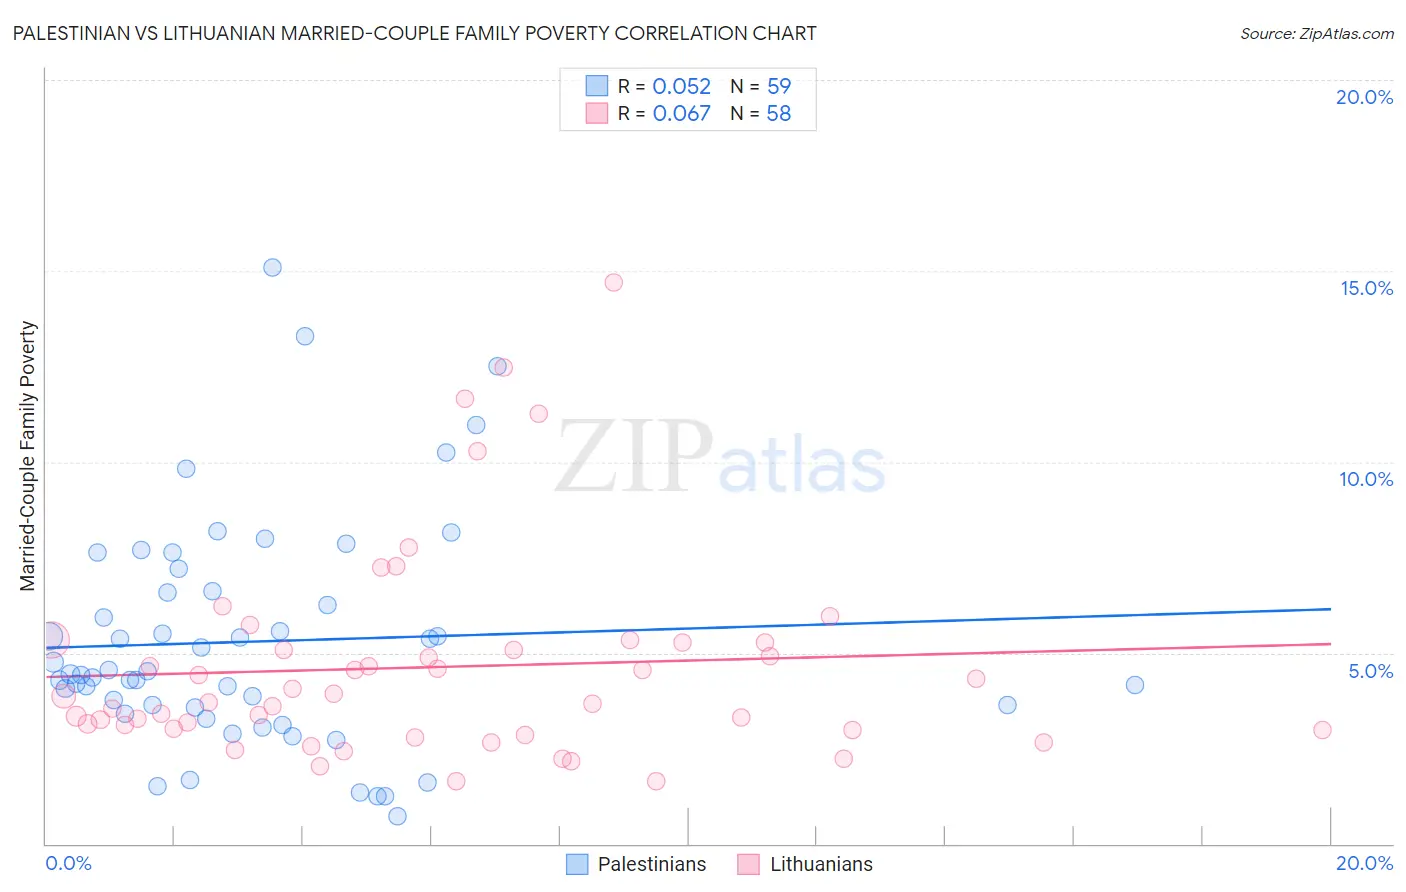 Palestinian vs Lithuanian Married-Couple Family Poverty